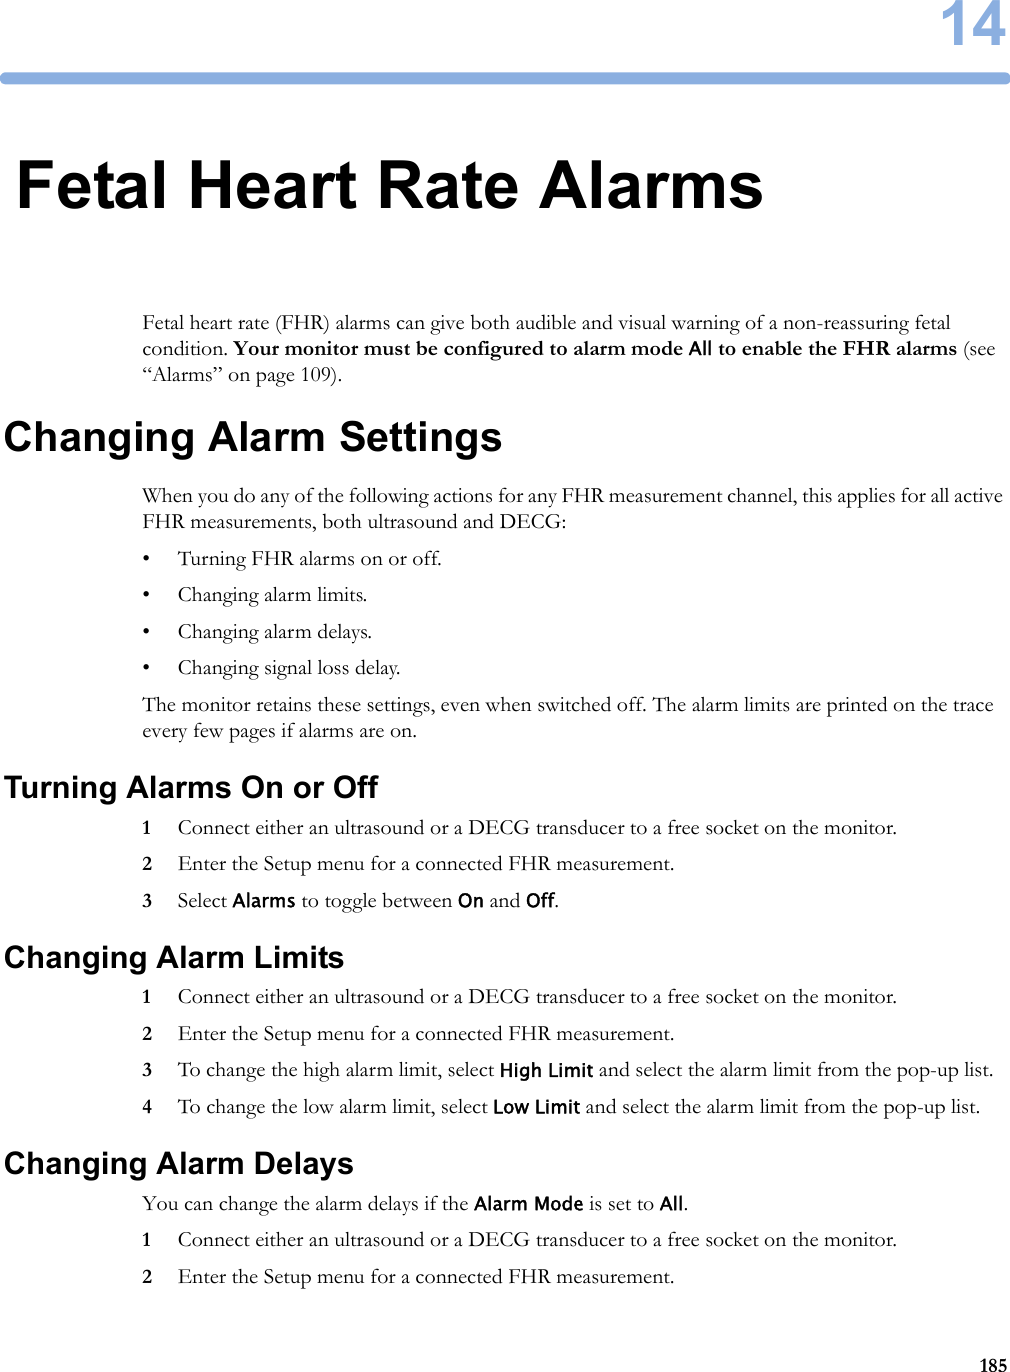 1418514Fetal Heart Rate AlarmsFetal heart rate (FHR) alarms can give both audible and visual warning of a non-reassuring fetal condition. Your monitor must be configured to alarm mode All to enable the FHR alarms (see “Alarms” on page 109).Changing Alarm SettingsWhen you do any of the following actions for any FHR measurement channel, this applies for all active FHR measurements, both ultrasound and DECG:• Turning FHR alarms on or off.• Changing alarm limits.• Changing alarm delays.• Changing signal loss delay.The monitor retains these settings, even when switched off. The alarm limits are printed on the trace every few pages if alarms are on.Turning Alarms On or Off1Connect either an ultrasound or a DECG transducer to a free socket on the monitor.2Enter the Setup menu for a connected FHR measurement.3Select Alarms to toggle between On and Off.Changing Alarm Limits1Connect either an ultrasound or a DECG transducer to a free socket on the monitor.2Enter the Setup menu for a connected FHR measurement.3To change the high alarm limit, select High Limit and select the alarm limit from the pop-up list.4To change the low alarm limit, select Low Limit and select the alarm limit from the pop-up list.Changing Alarm DelaysYou can change the alarm delays if the Alarm Mode is set to All.1Connect either an ultrasound or a DECG transducer to a free socket on the monitor.2Enter the Setup menu for a connected FHR measurement.